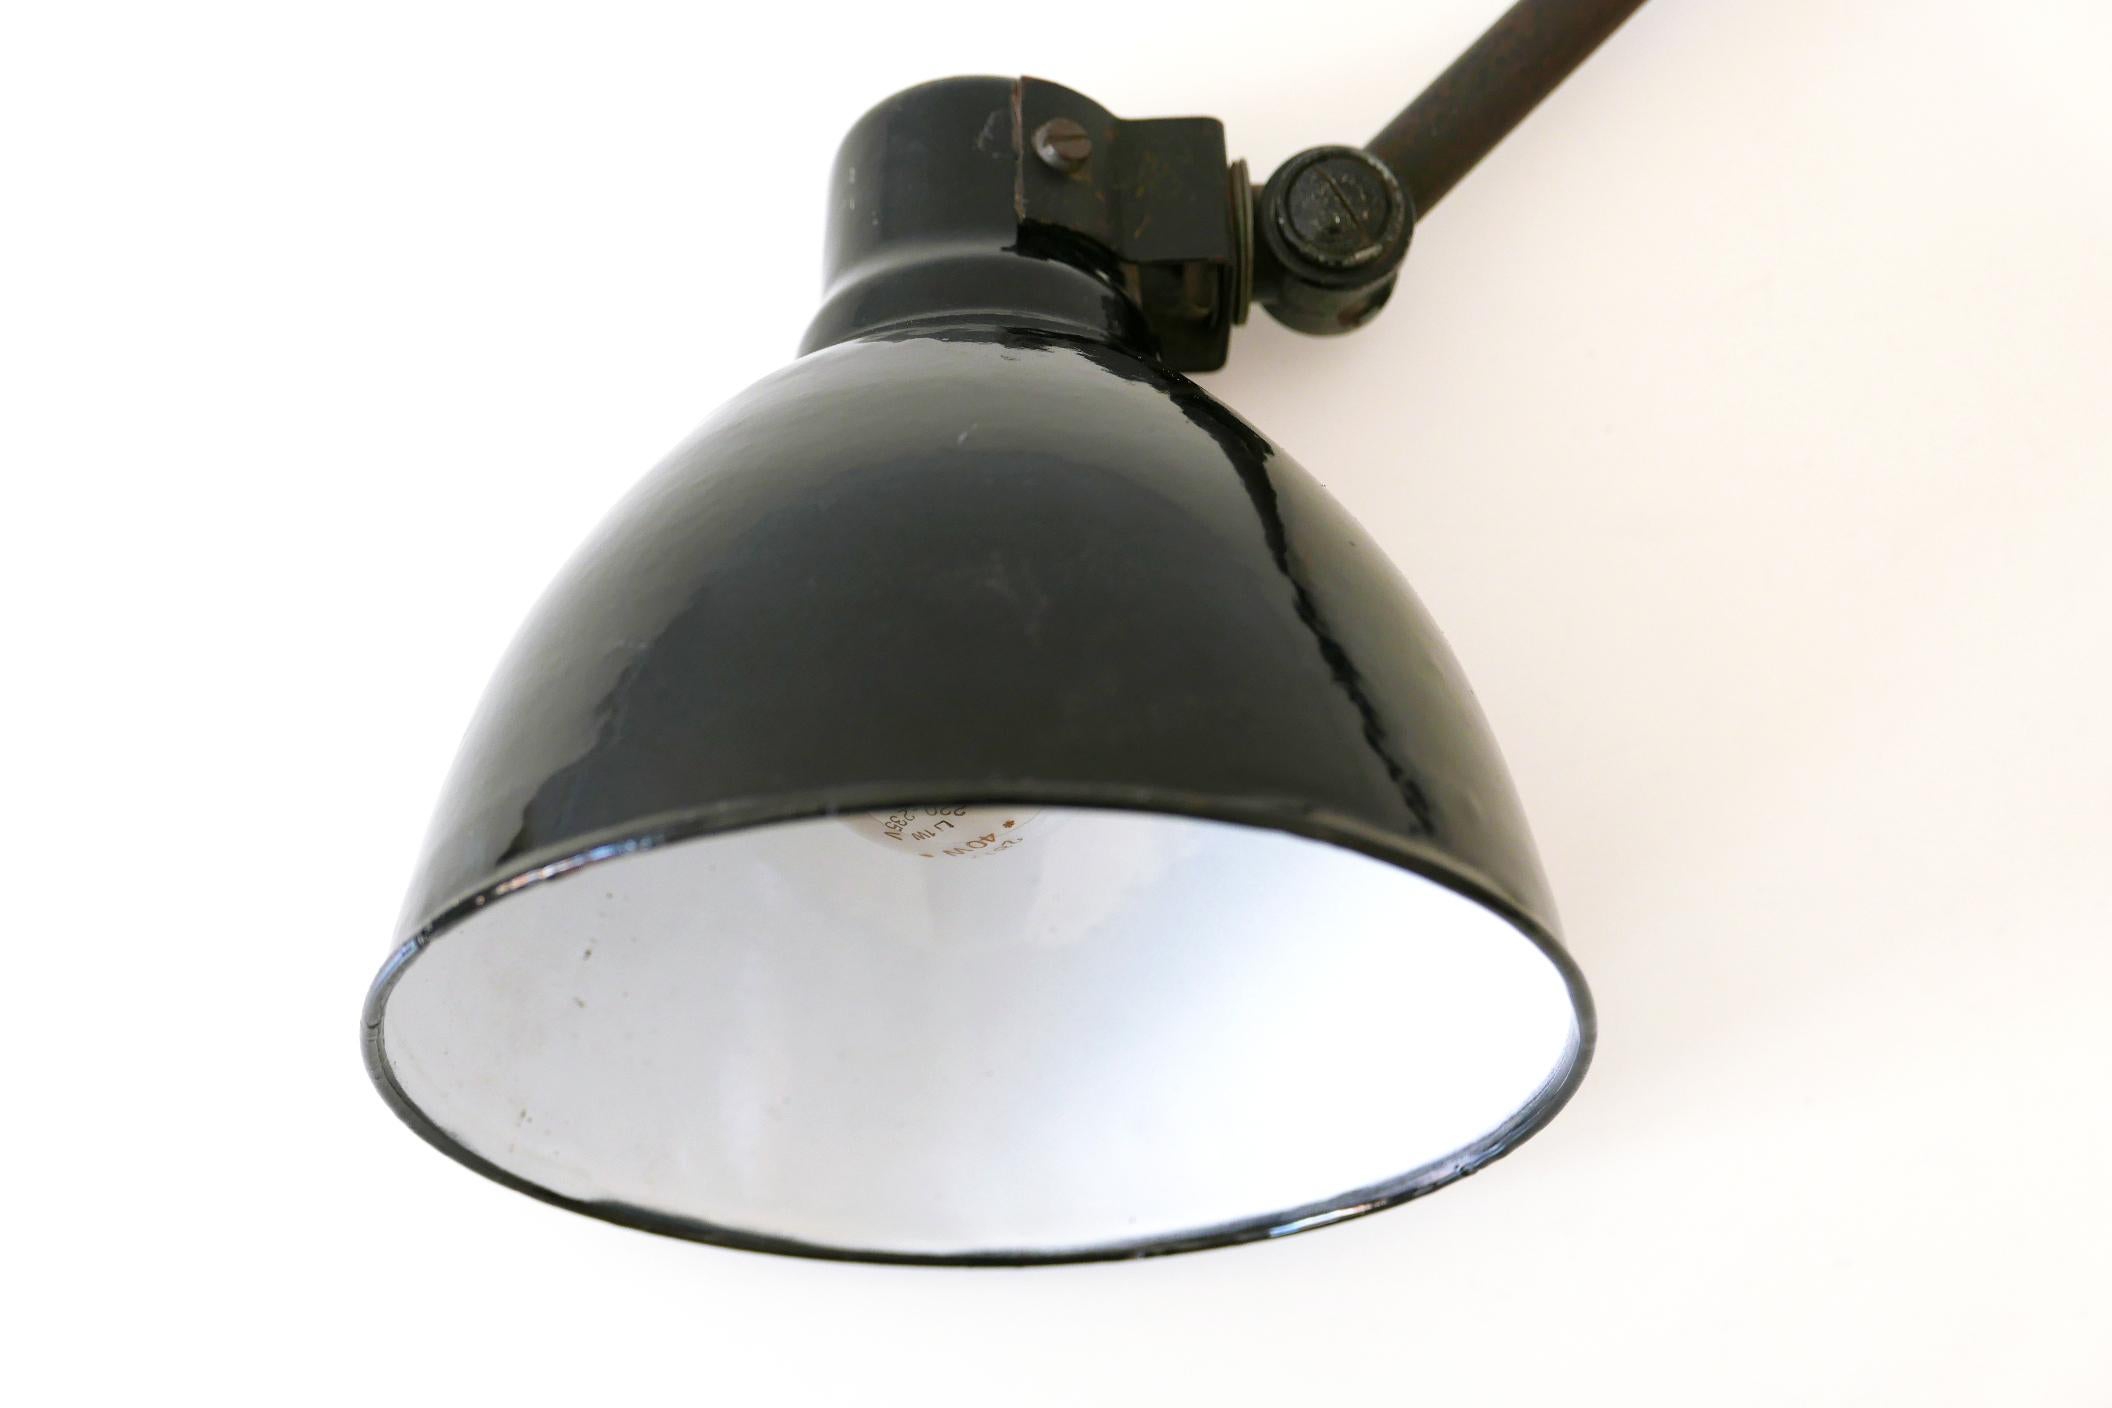 Bauhaus Task Lamp or Clamp Table Light by Peter Behrens for AEG 1920s, Germany 6